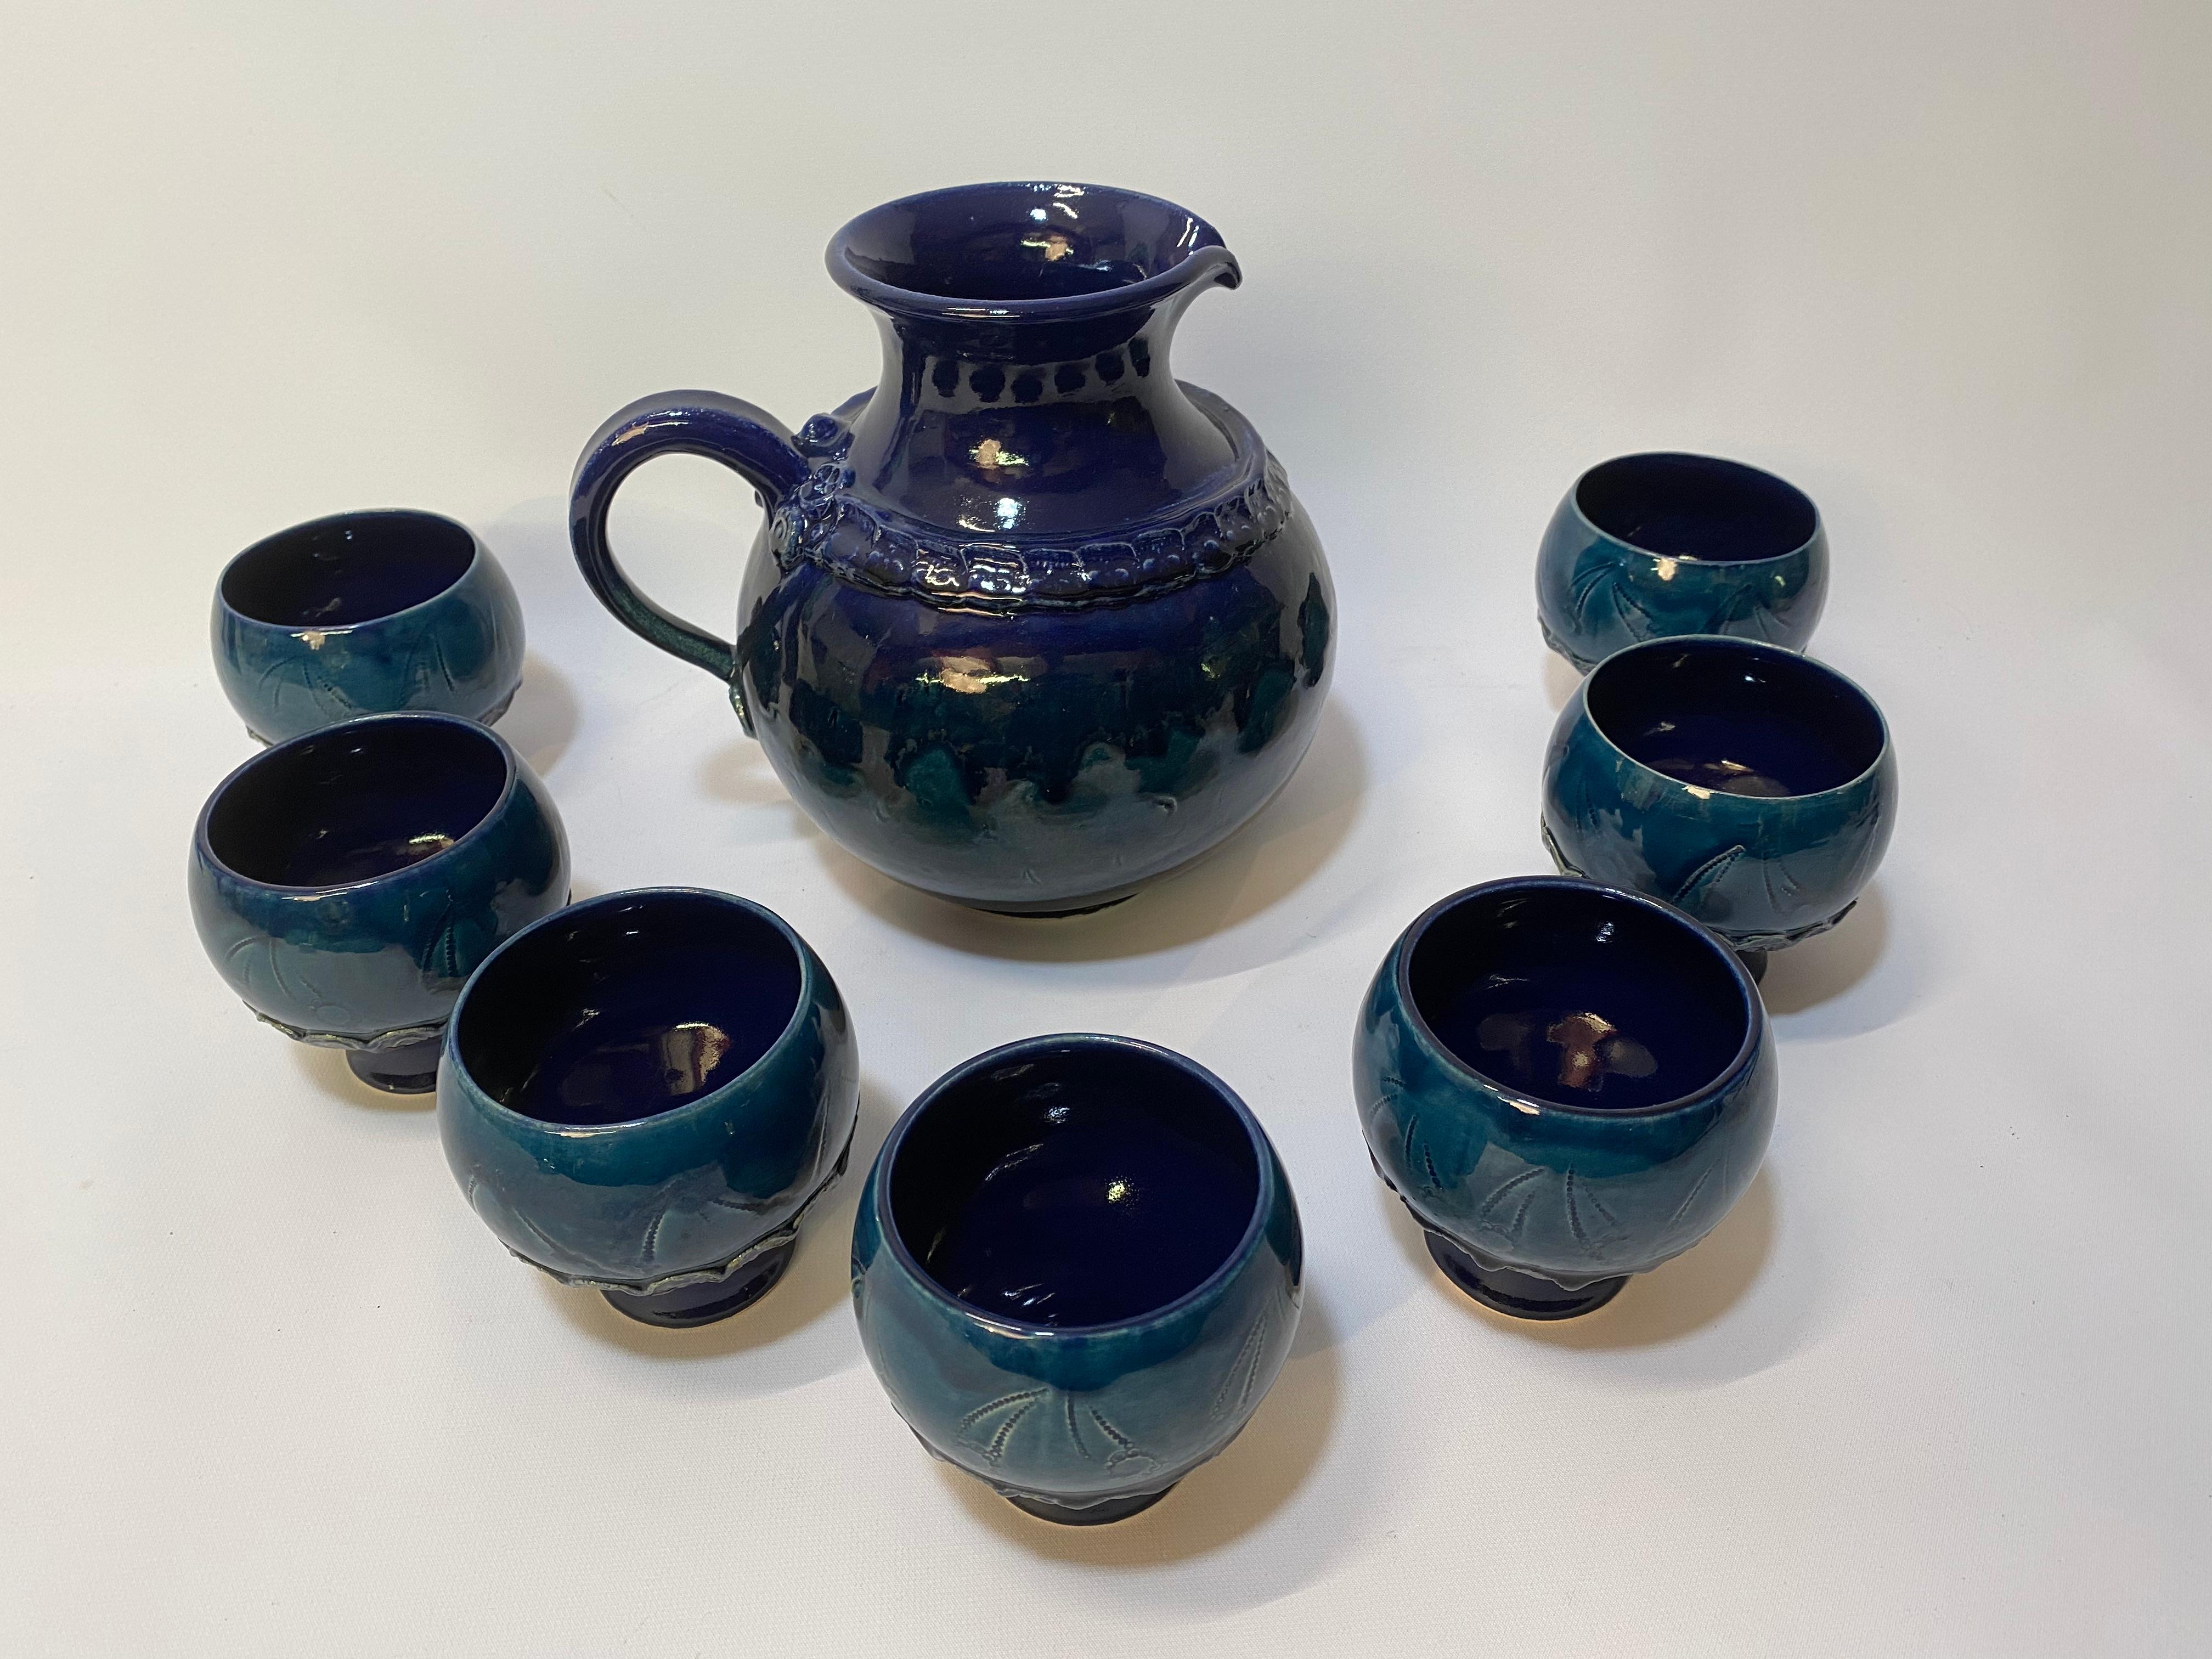 Bjorn Wiinblad for Rosenthal ceramic pitcher and cups. One large pitcher with seven cups. Glossy two-tone blue glaze. Impressed floral design Good overall condition with some tight crazing to the glaze. No visible chips, hairlines or restorations.